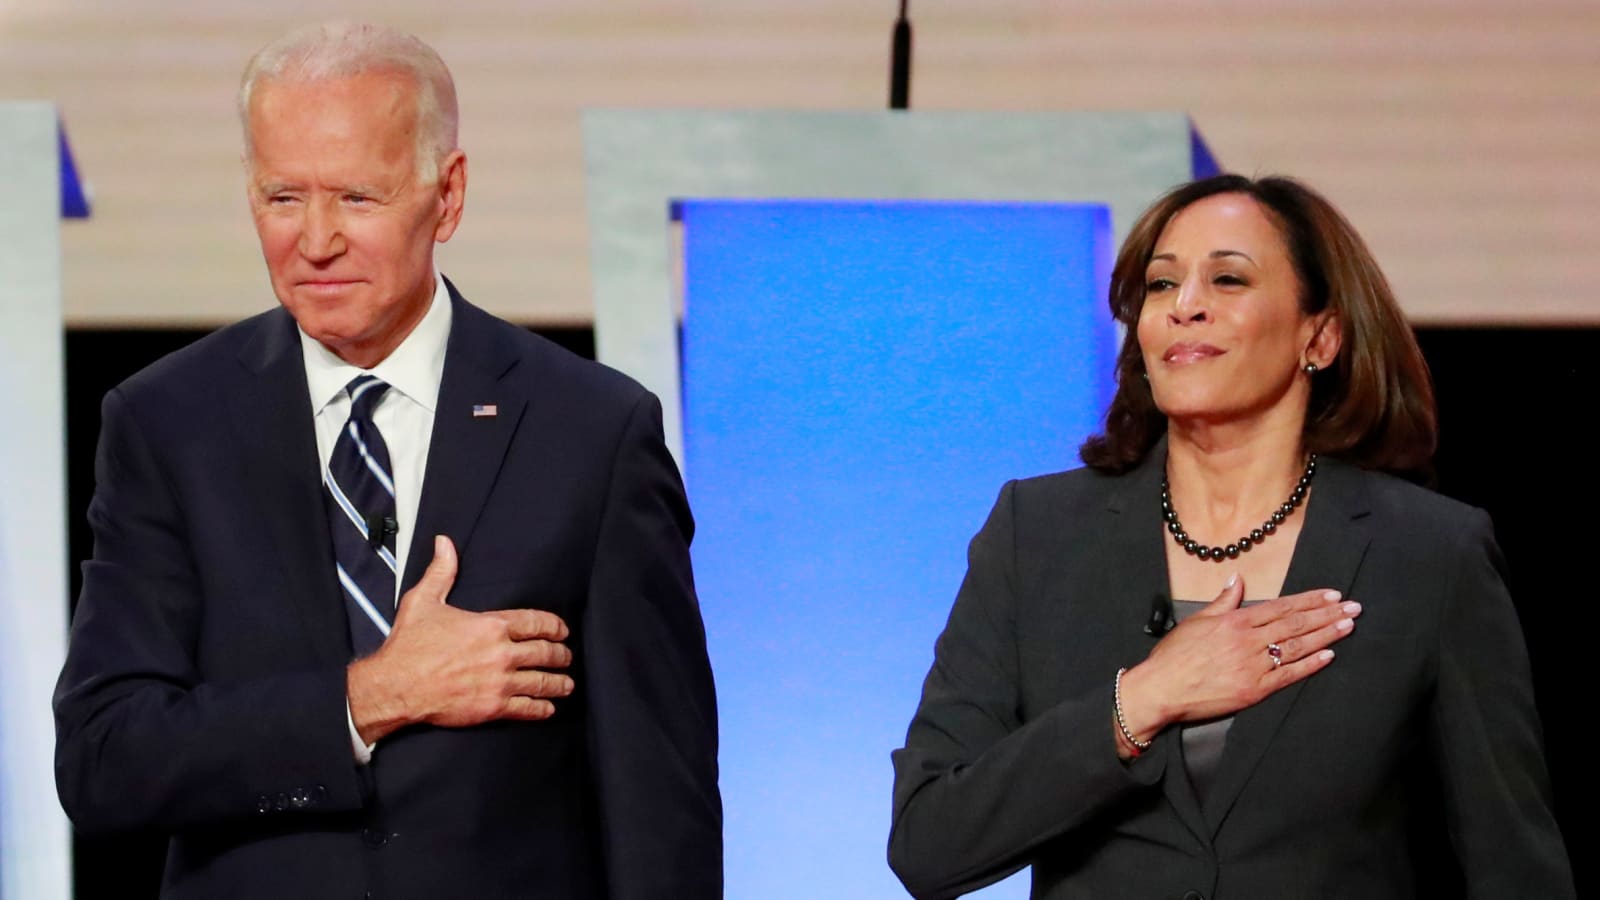 Watch live: Joe Biden, Kamala Harris appear together as running mates for first time